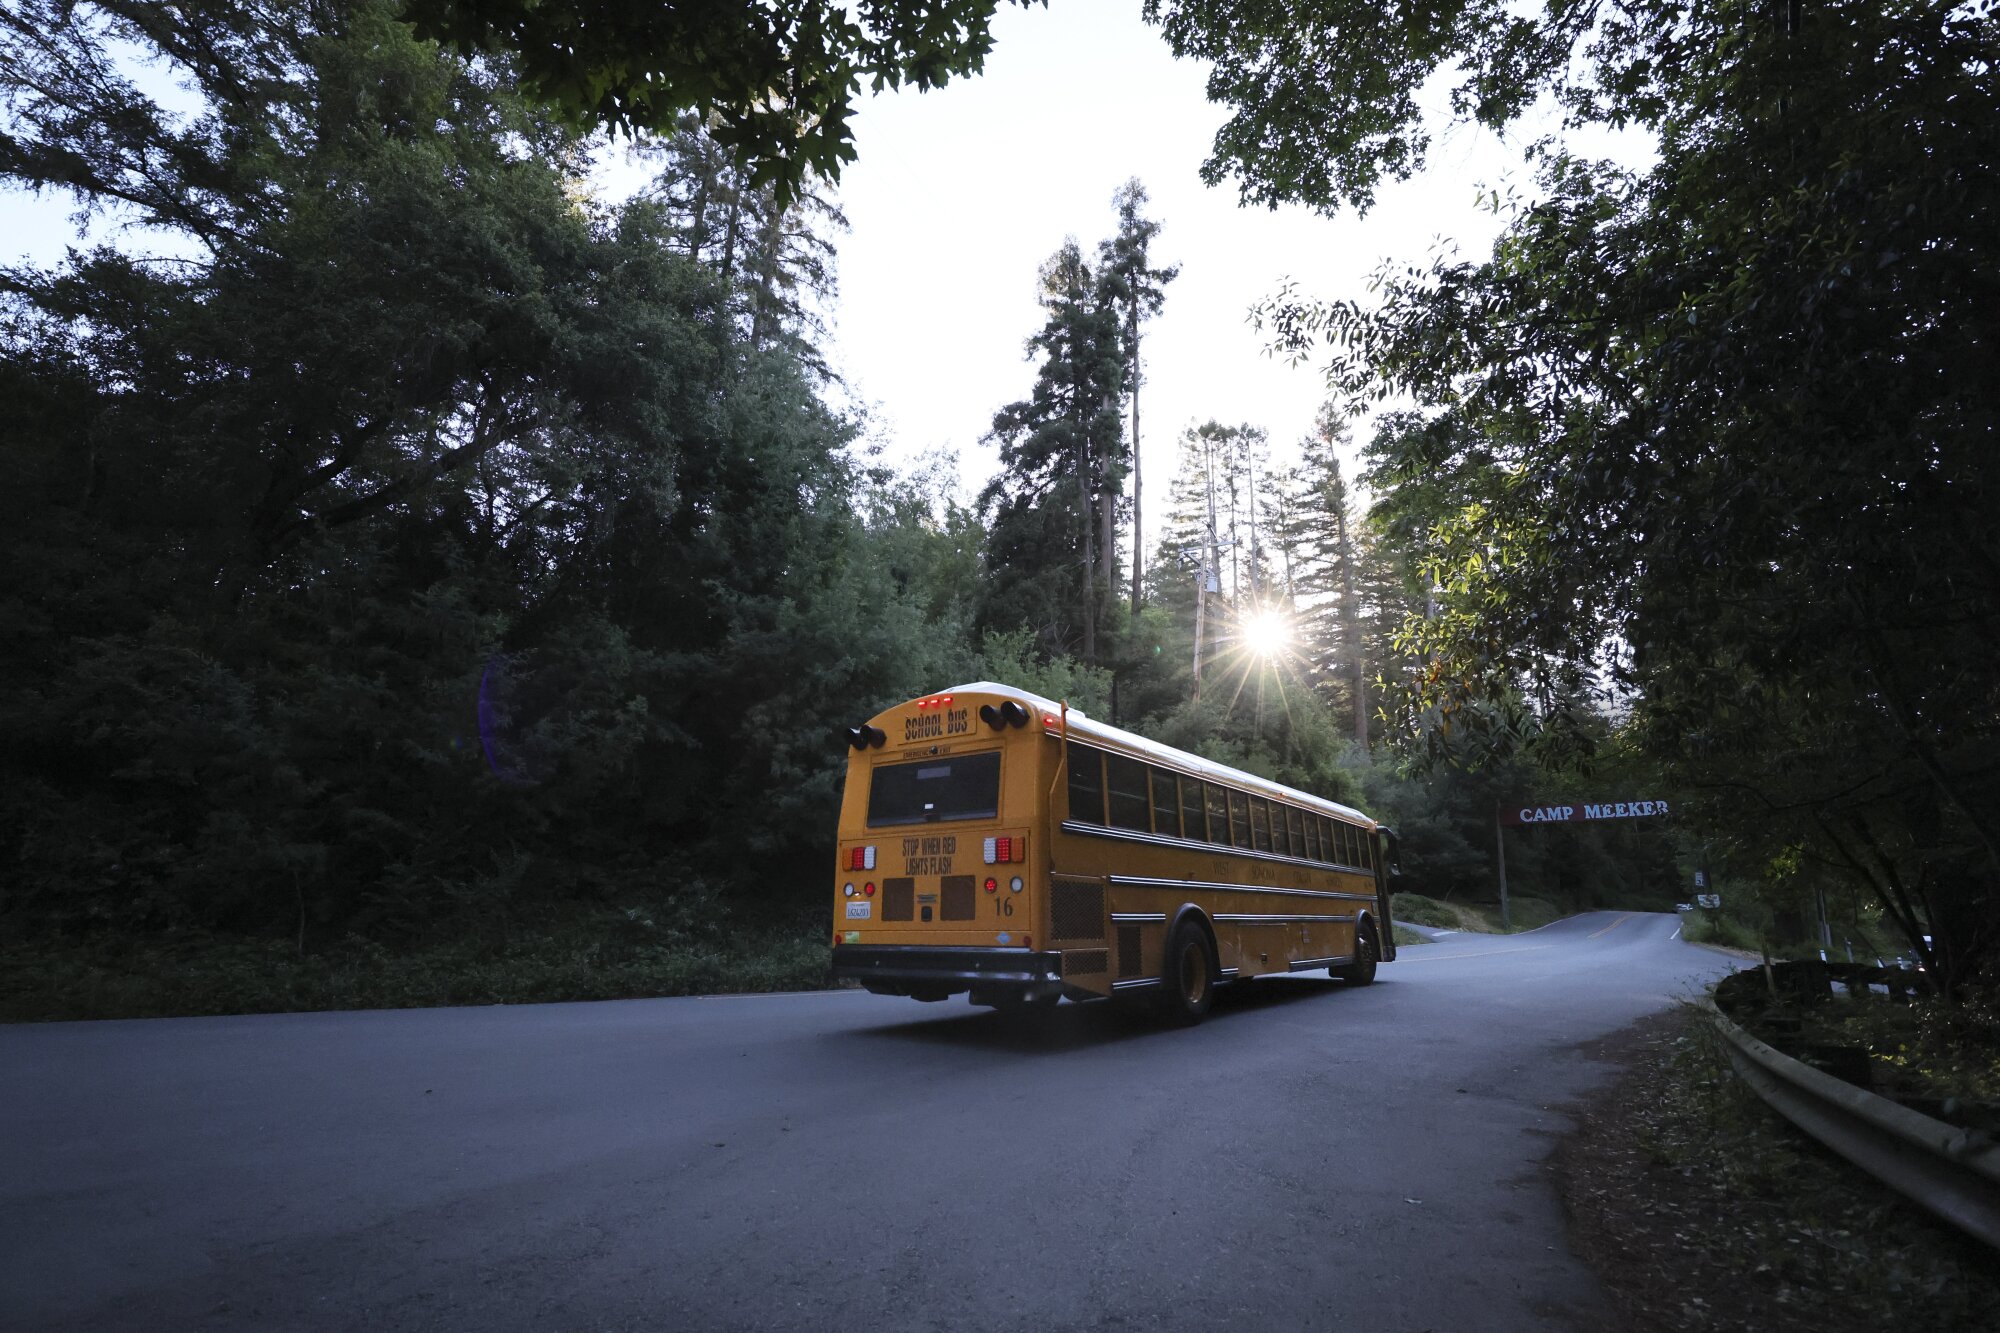 A yellow school bus on a road with trees on both sides.